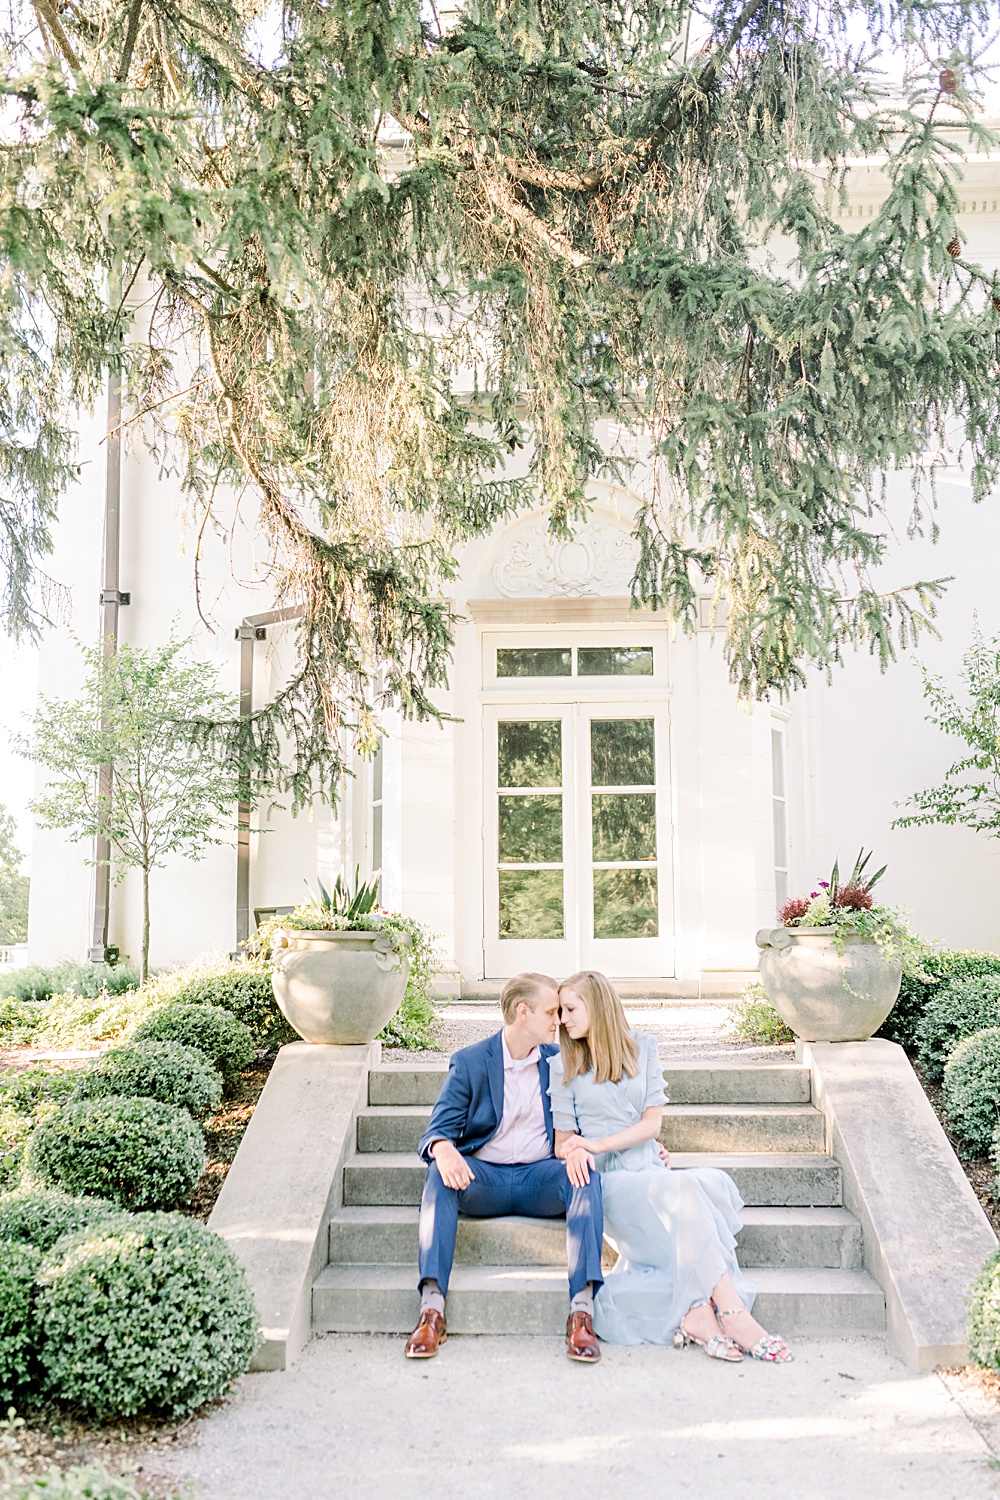 Couple sitting on cement steps under a large pine tree. Golden light is falling through the branches creating a beautiful glow around them. She is in a blue dress and he is in a blue suit.